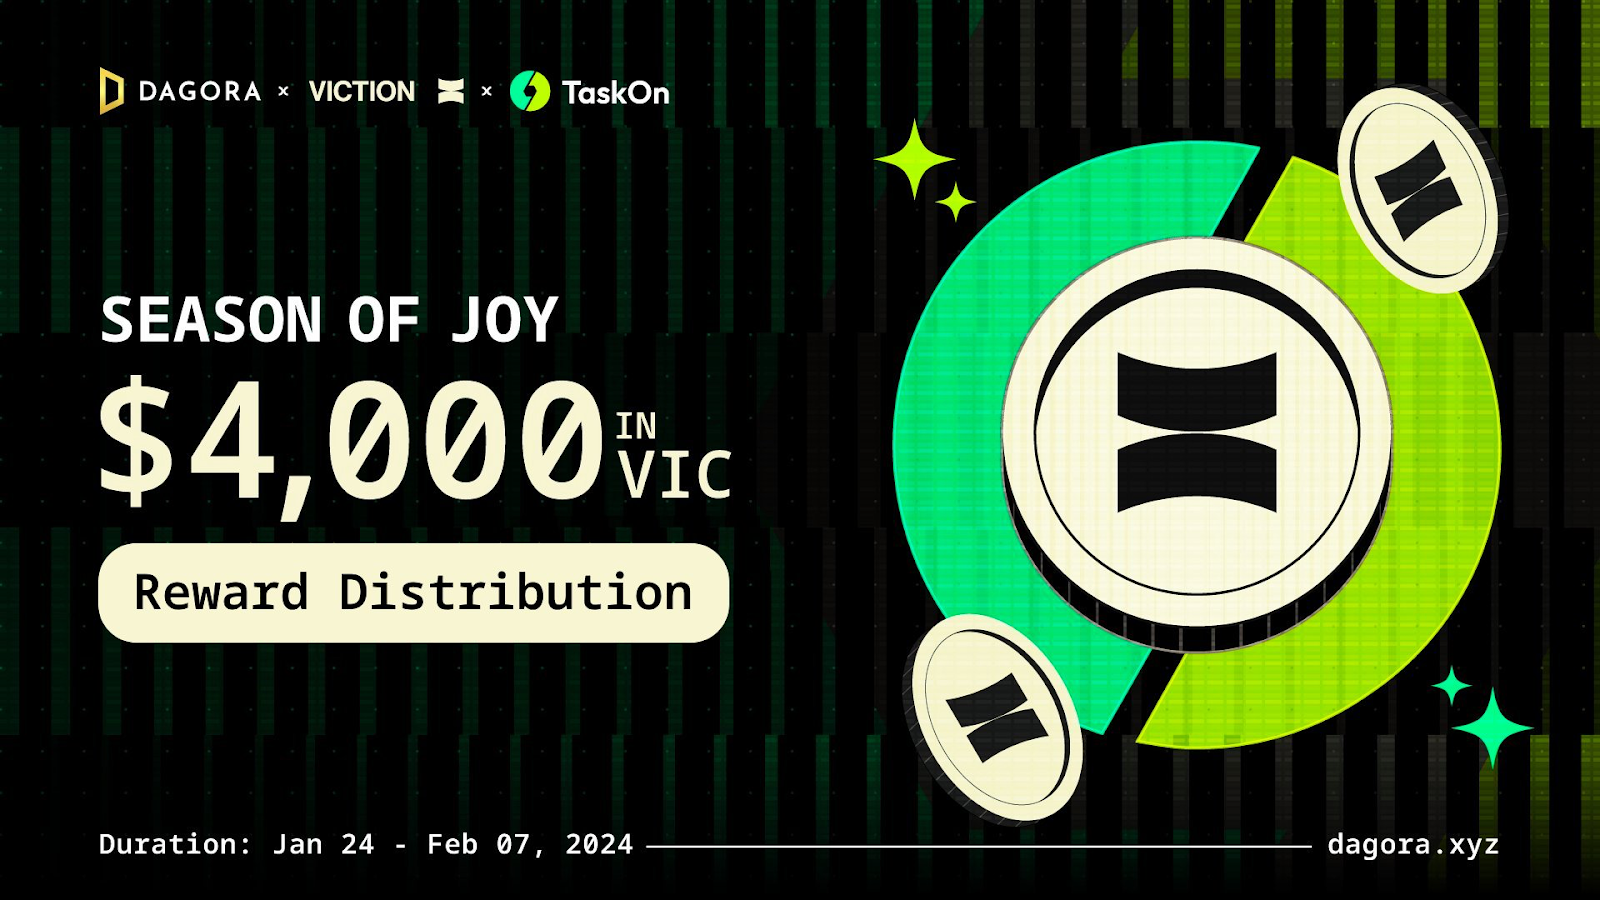 Viction February’s Highlights